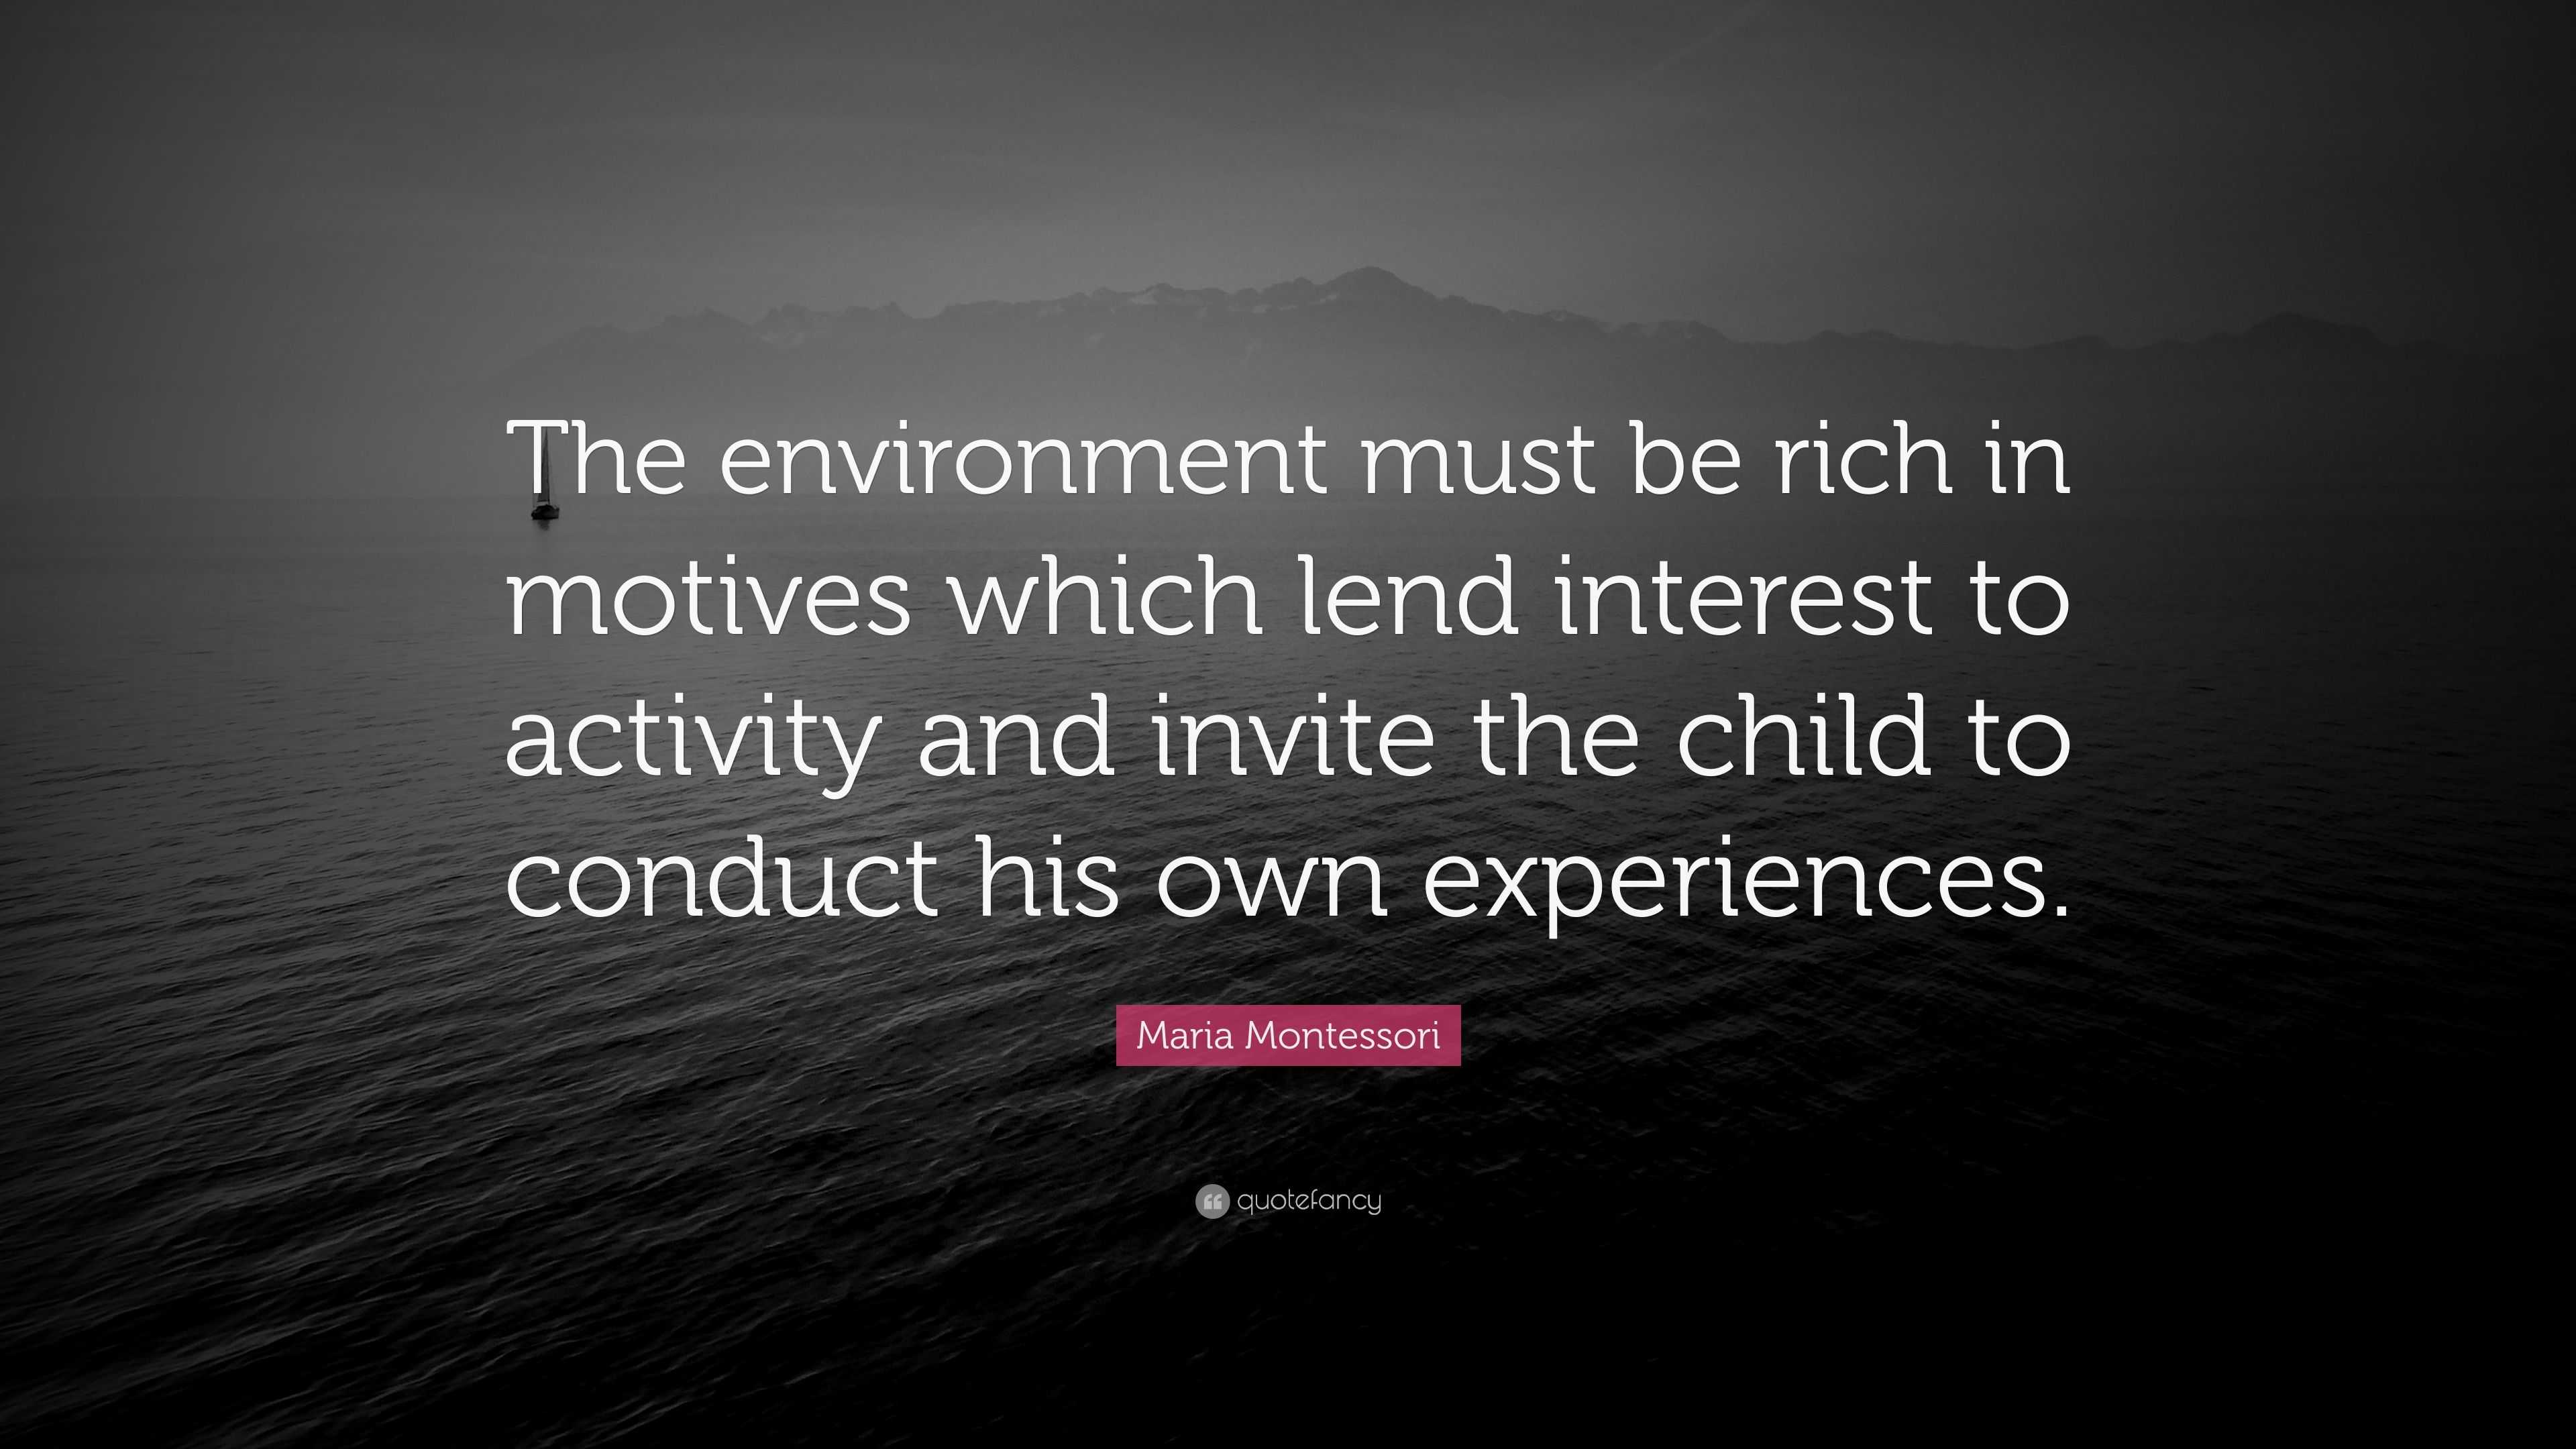 Maria Montessori Quote: “The environment must be rich in motives which